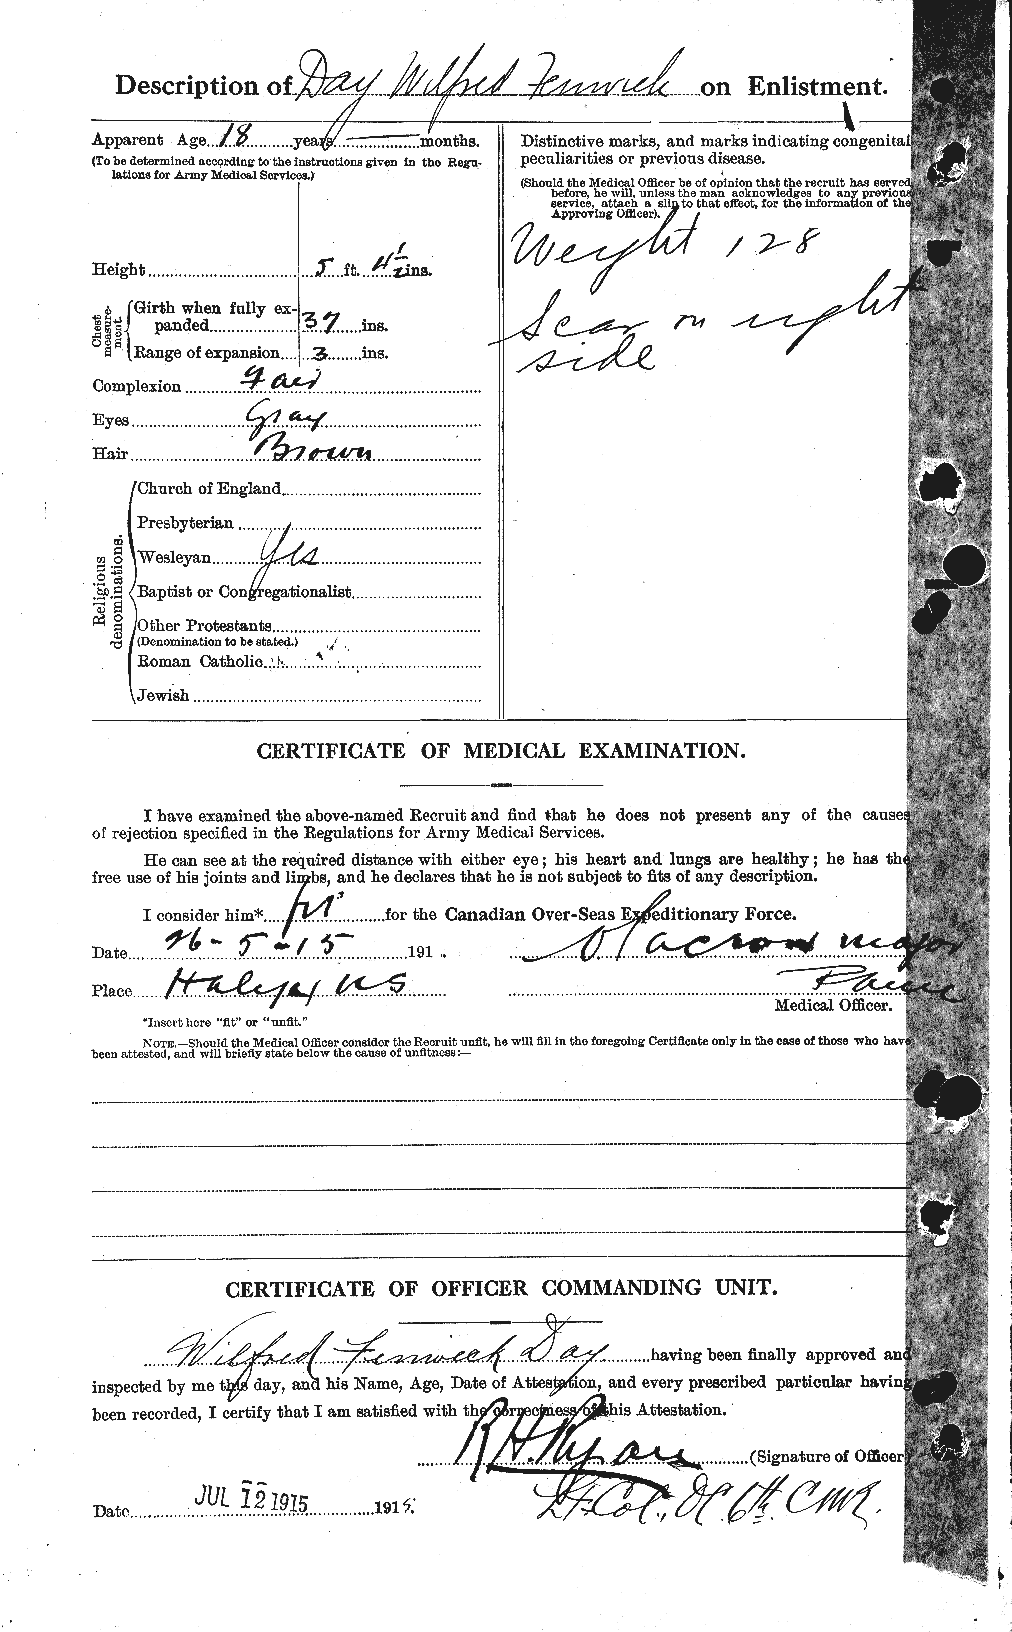 Personnel Records of the First World War - CEF 283518b